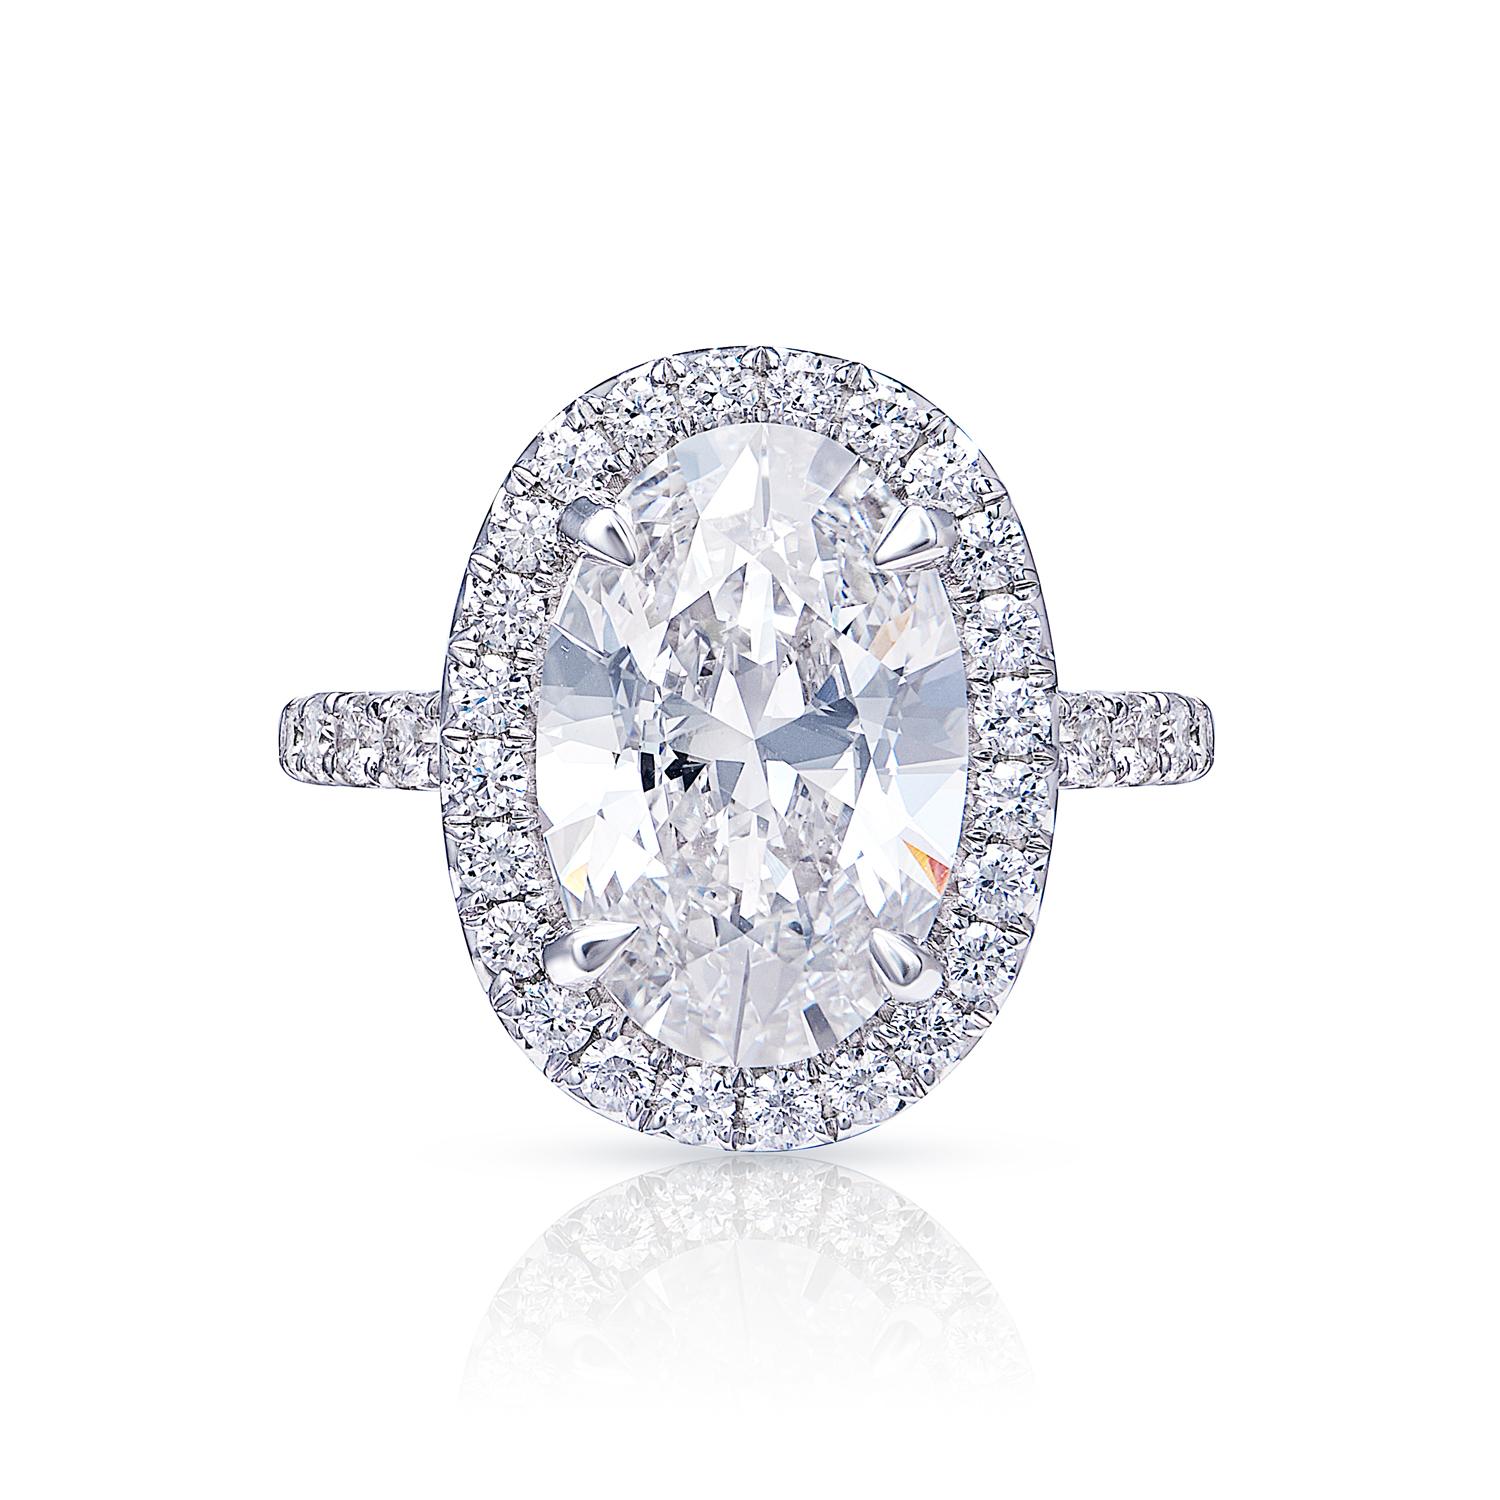 Introducing the GIA-Certified Oval Cut Diamond Ring, a stunning piece of jewelry that is sure to take your breath away. This ring features a beautiful oval-cut diamond that has been certified by the Gemological Institute of America (GIA), ensuring